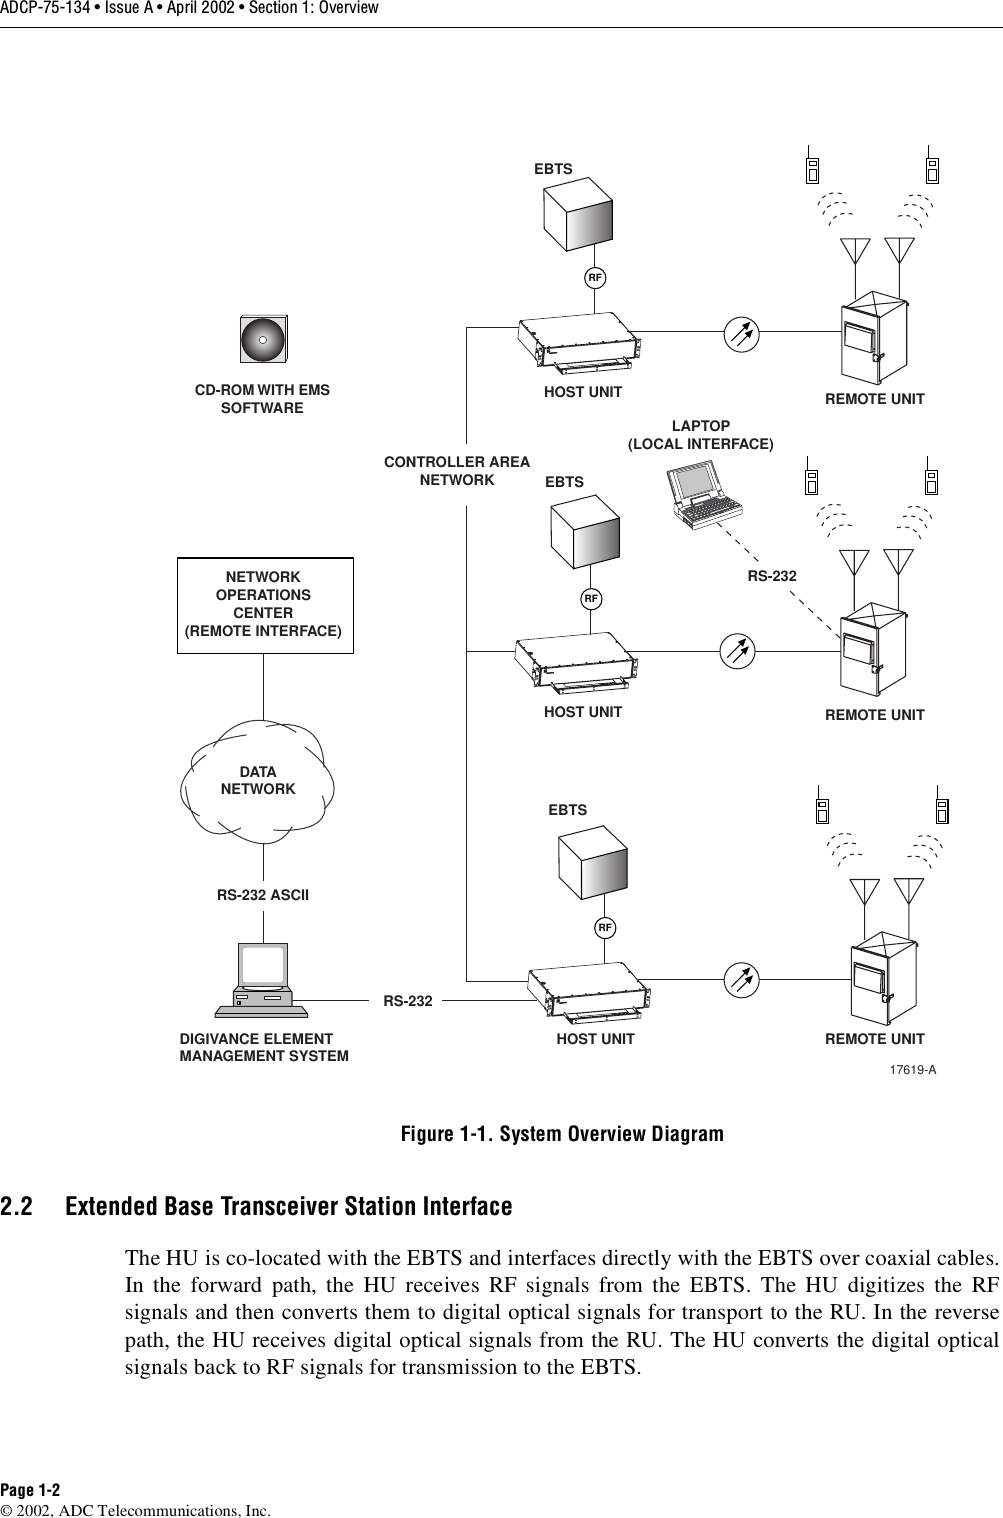 ADCP-75-134 • Issue A • April 2002 • Section 1: OverviewPage 1-2©2002, ADC Telecommunications, Inc.Figure 1-1. System Overview Diagram2.2 Extended Base Transceiver Station InterfaceThe HU is co-located with the EBTS and interfaces directly with the EBTS over coaxial cables.In the forward path, the HU receives RF signals from the EBTS. The HU digitizes the RFsignals and then converts them to digital optical signals for transport to the RU. In the reversepath, the HU receives digital optical signals from the RU. The HU converts the digital opticalsignals back to RF signals for transmission to the EBTS.EBTSEBTSEBTSDIGIVANCE ELEMENTMANAGEMENT SYSTEMRFRFRFHOST UNITHOST UNITHOST UNITREMOTE UNITREMOTE UNITREMOTE UNITNETWORKOPERATIONSCENTER(REMOTE INTERFACE)LAPTOP(LOCAL INTERFACE)DATANETWORKCONTROLLER AREANETWORKRS-232 ASCIIRS-23217619-ACD-ROM WITH EMSSOFTWARERS-232